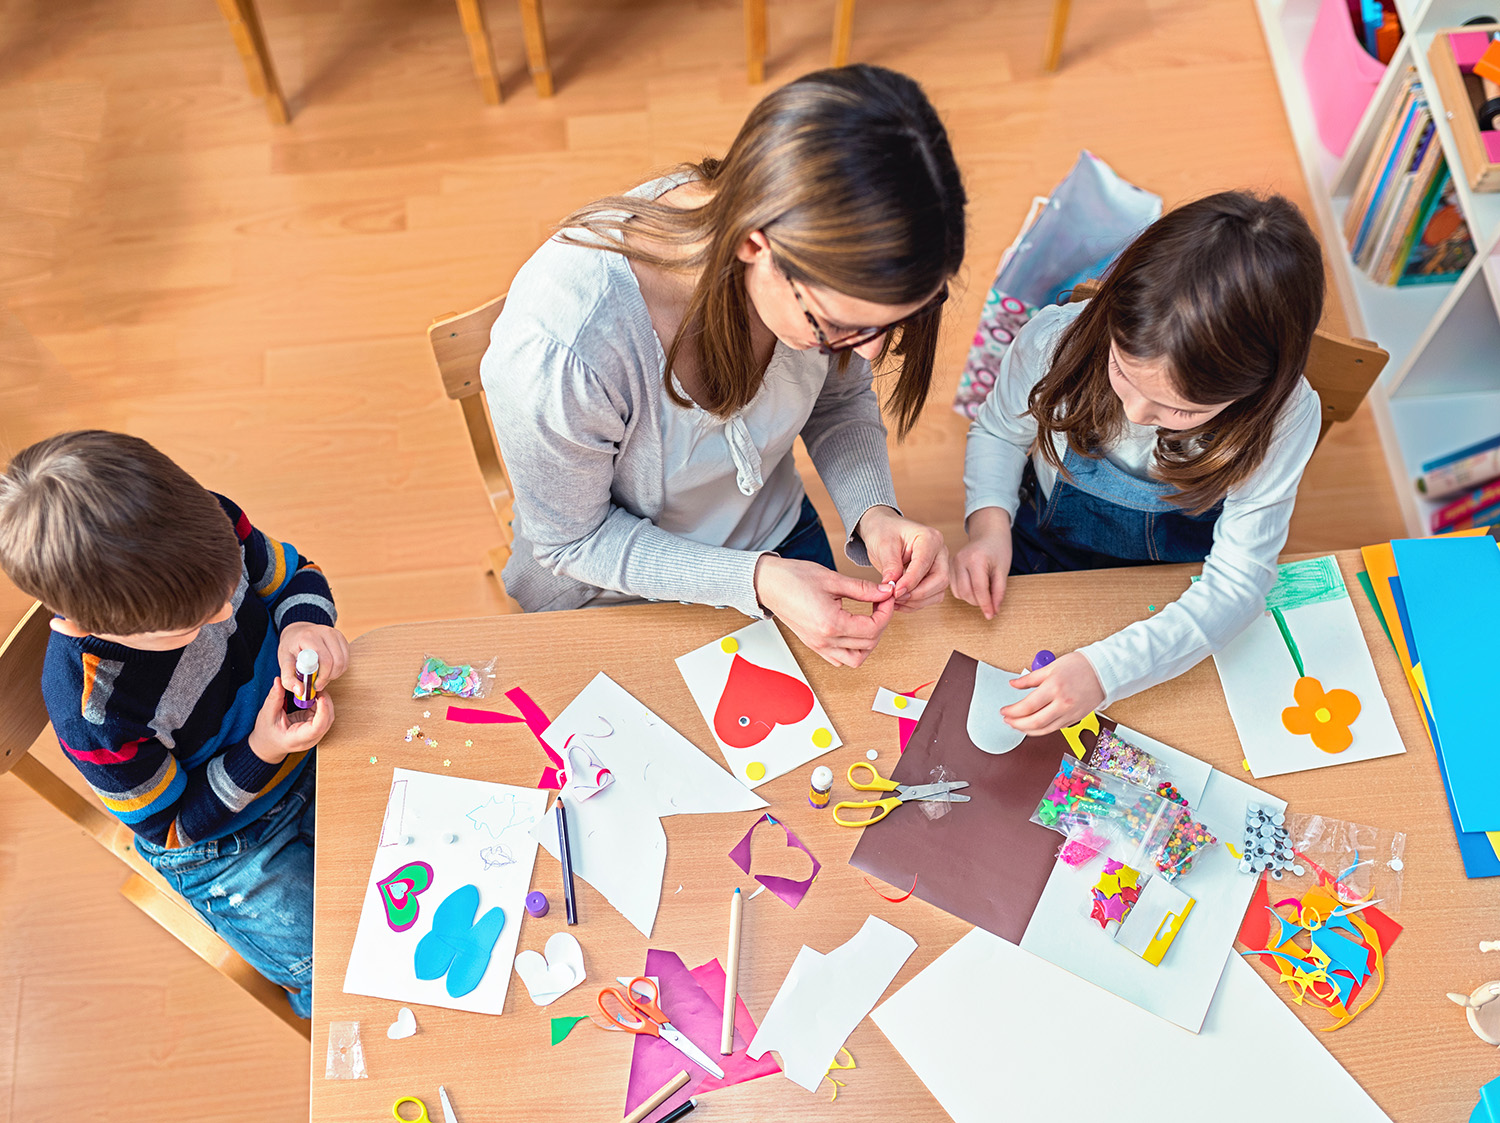 10 tips to make art and craft fun for your kids